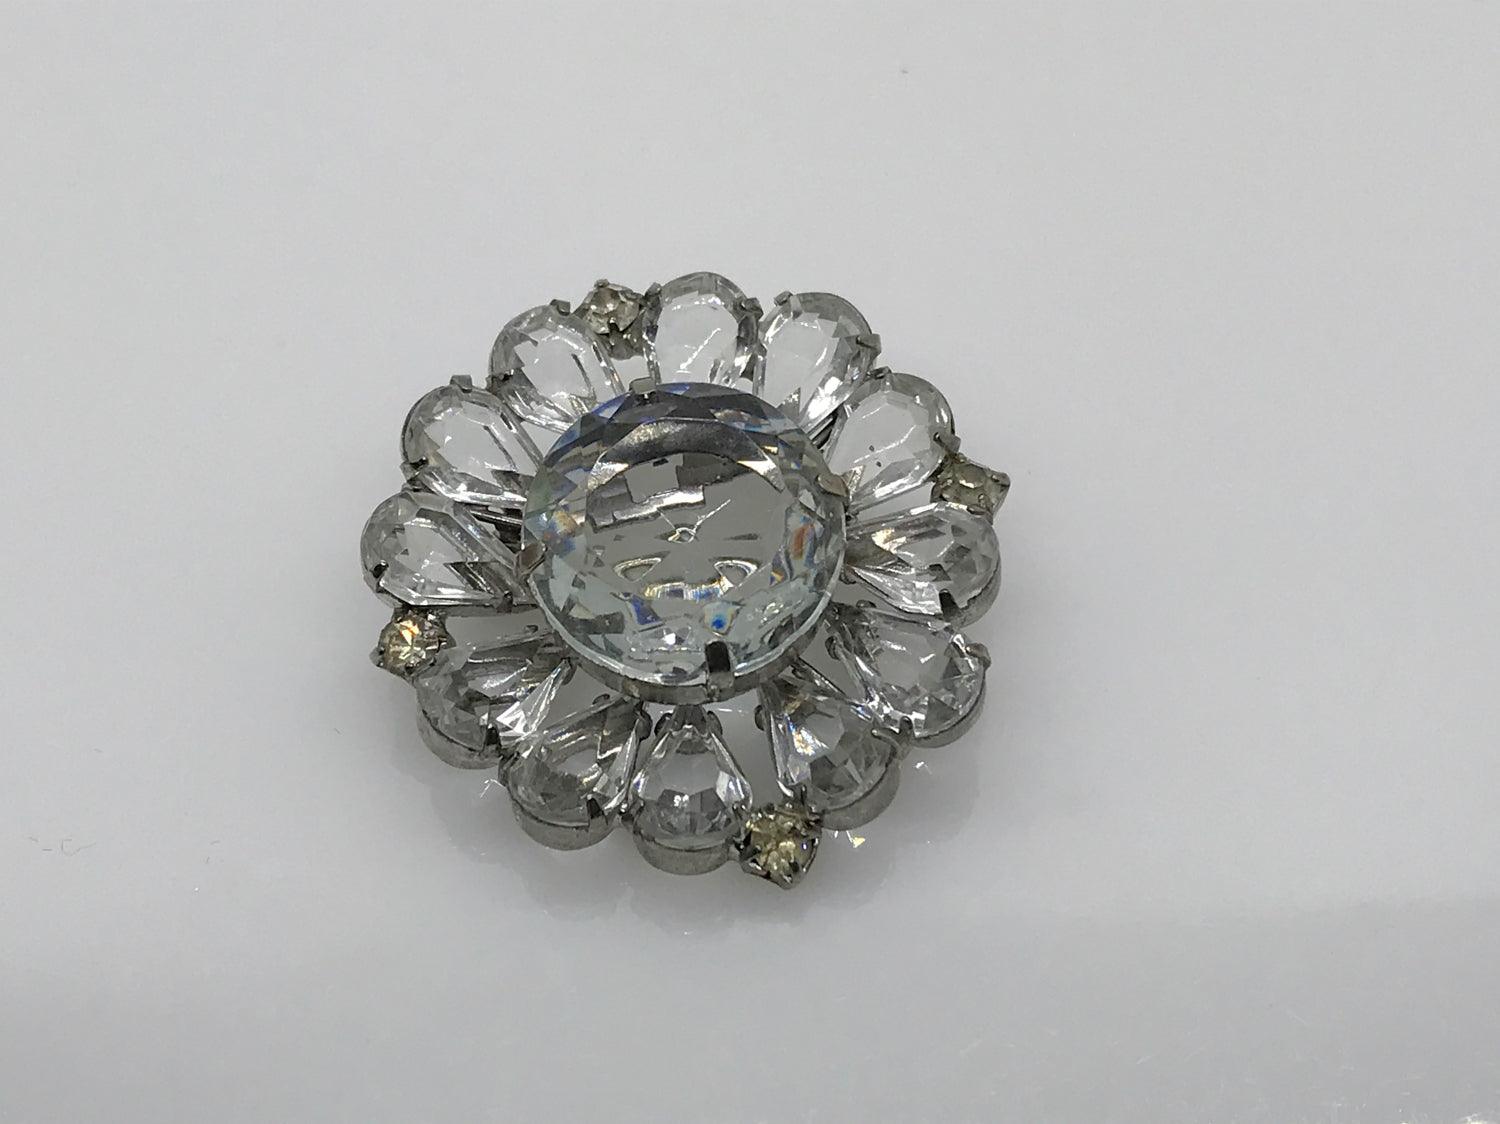 Vintage Layered Round Brooch with Clear Stones - Lamoree’s Vintage